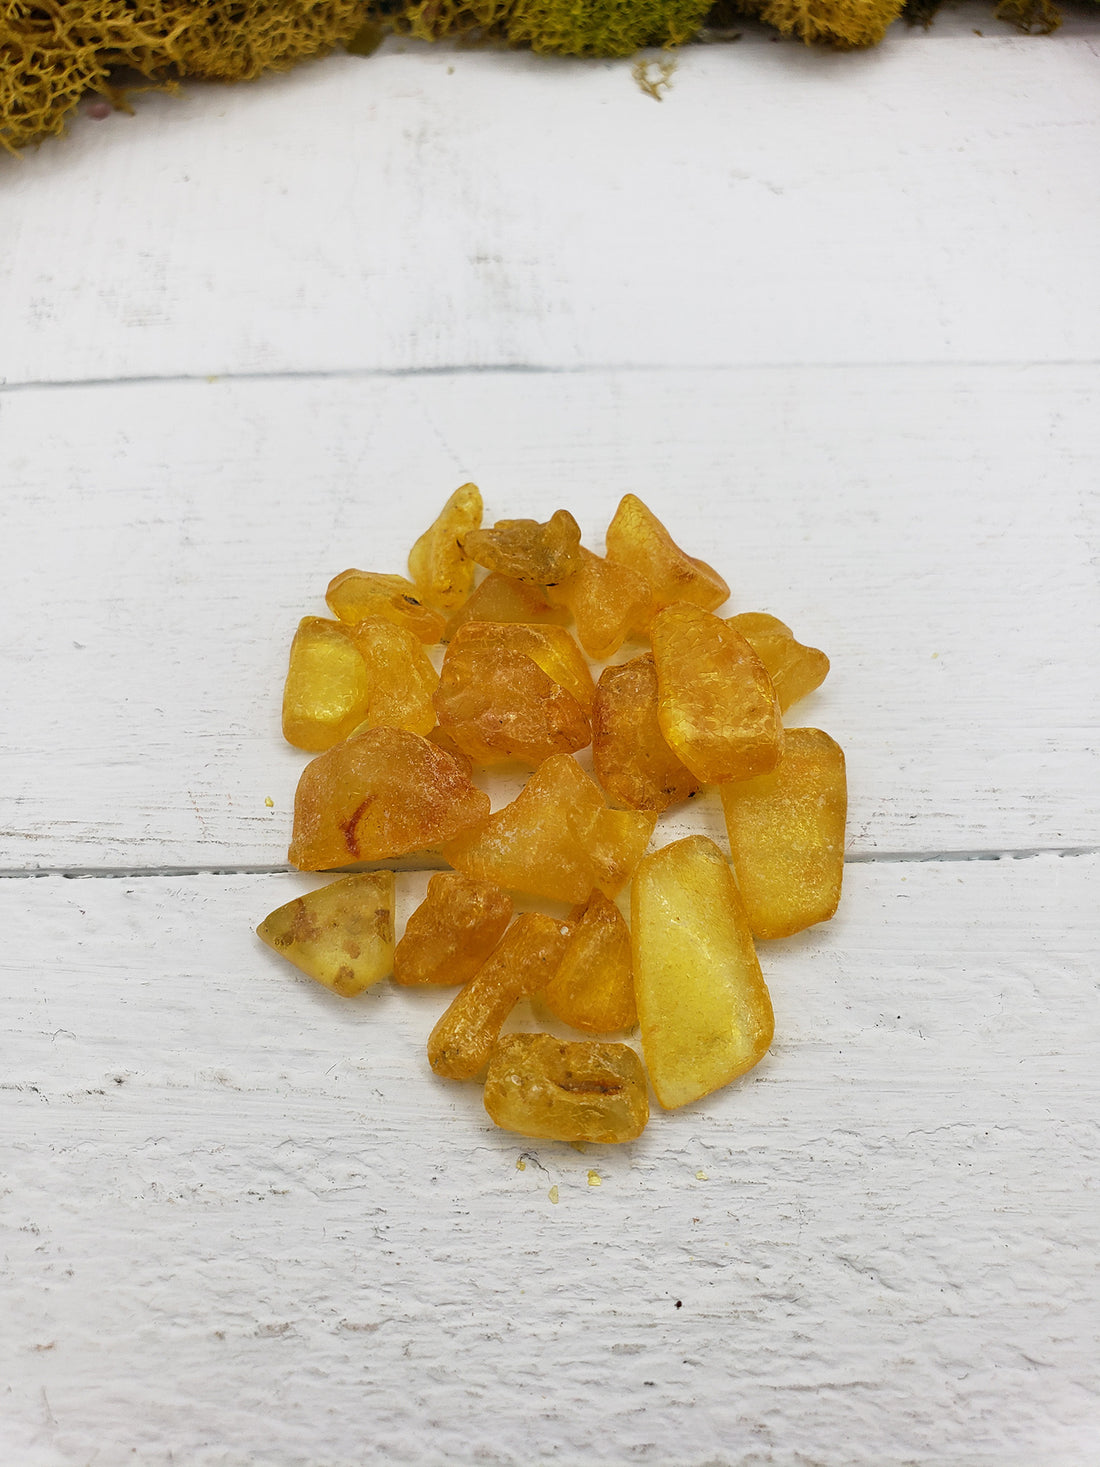 6 grams of amber stone chips on display